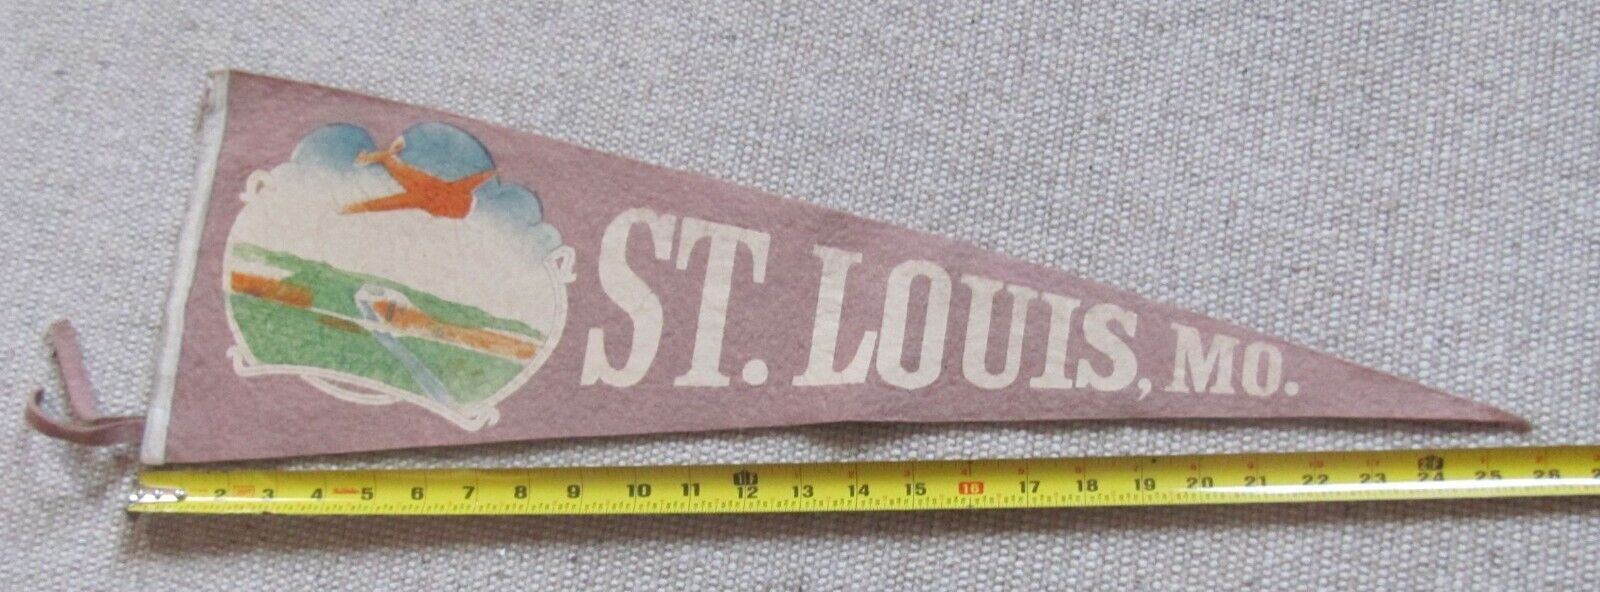 Vintage 1950s St. Louis MO Felt Pennant Airplane Graphic 26 Inches